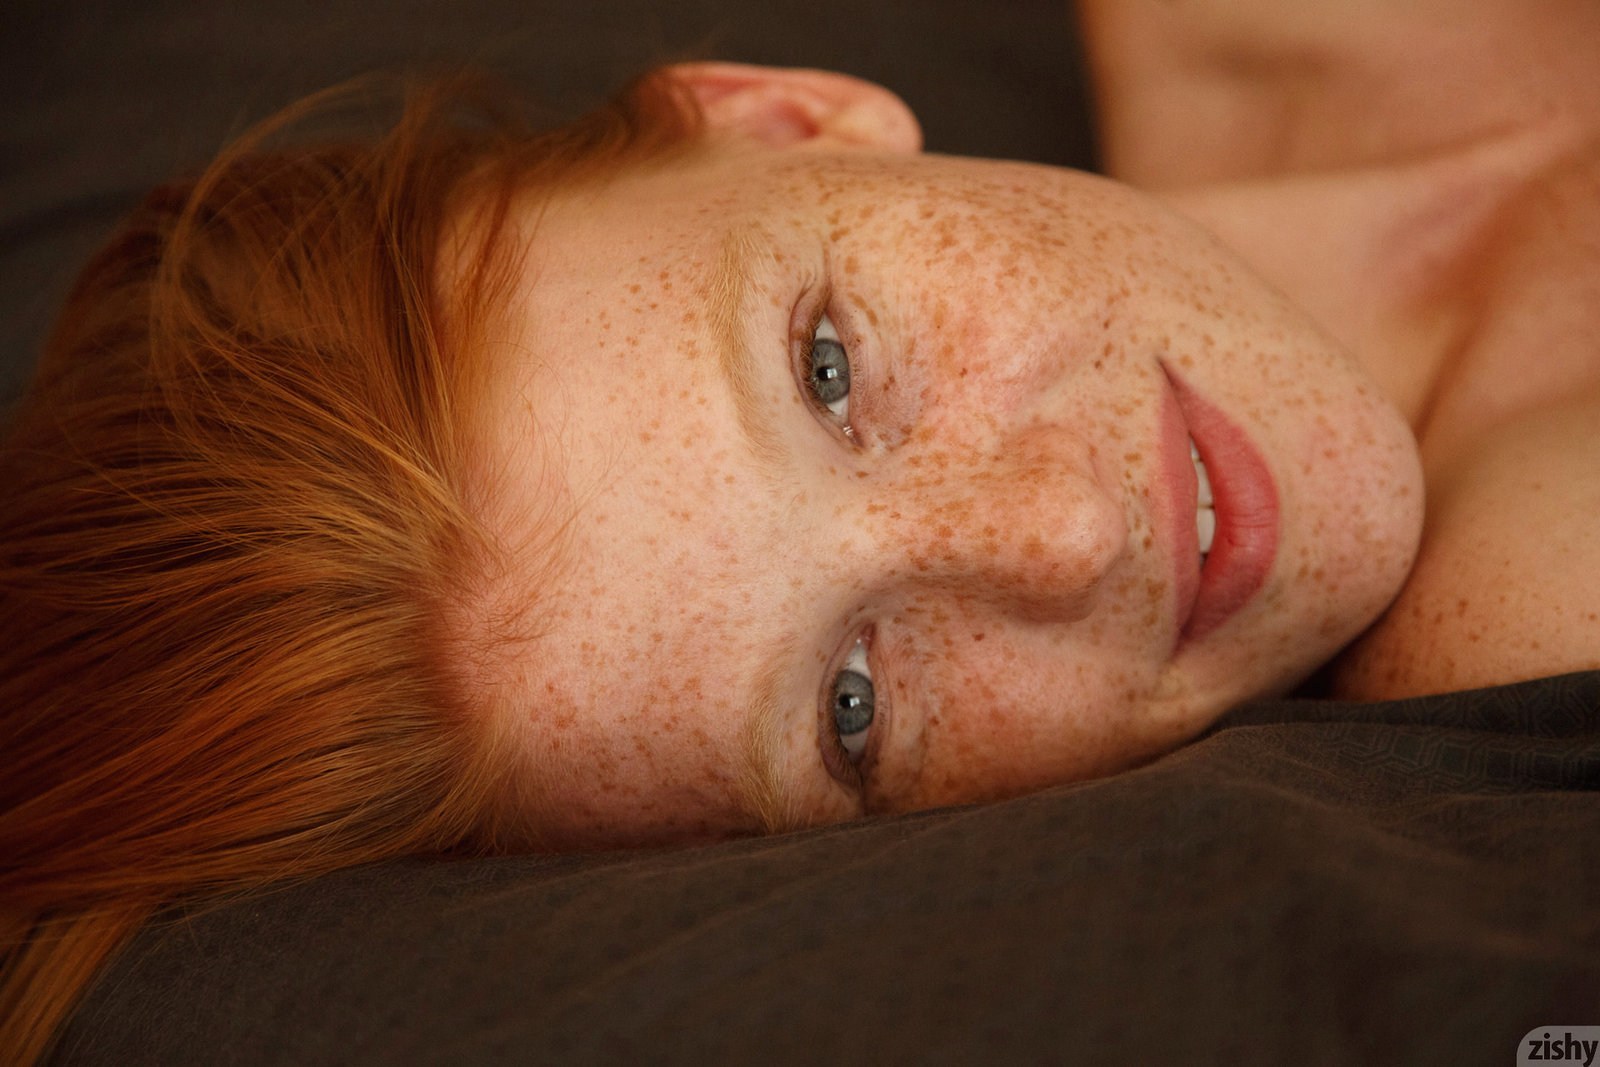 Freckled Redhead Porn Stars - Sex with A Redhead with Freckles (55 photos) - motherless porn pics